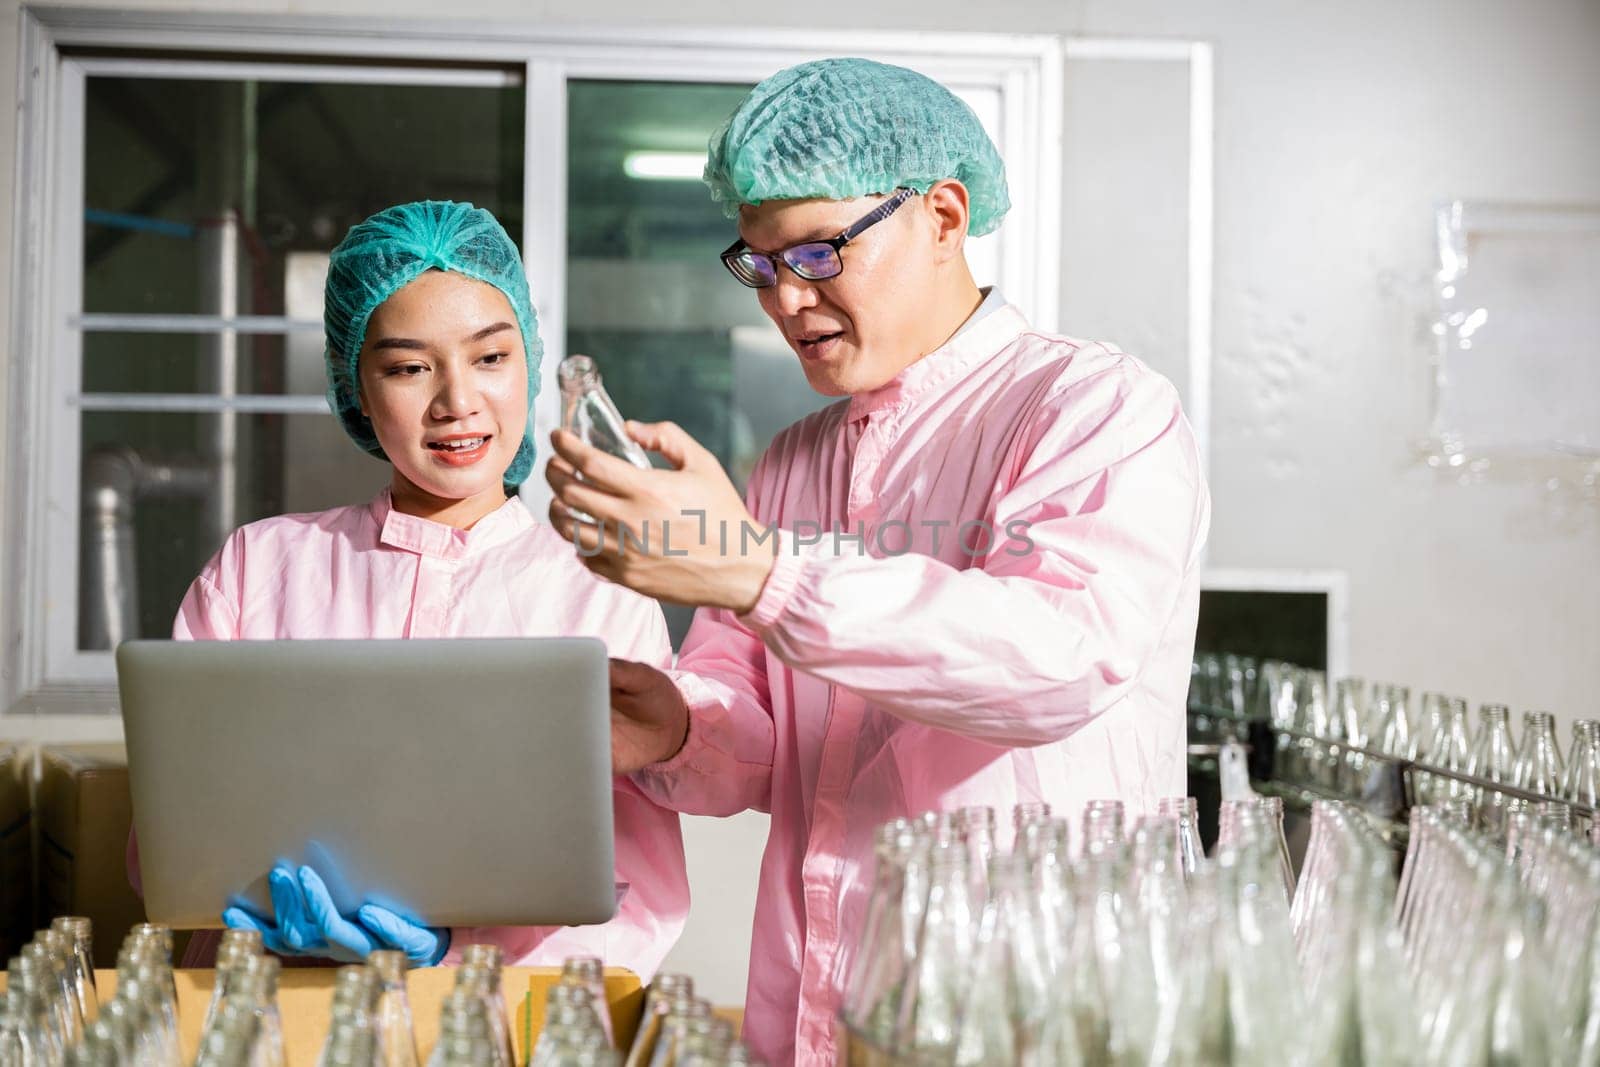 Two engineers conduct detailed inspections on product bottles in a beverage factory's conveyor belt. Quality control and inspection managed by professionals using a laptop.